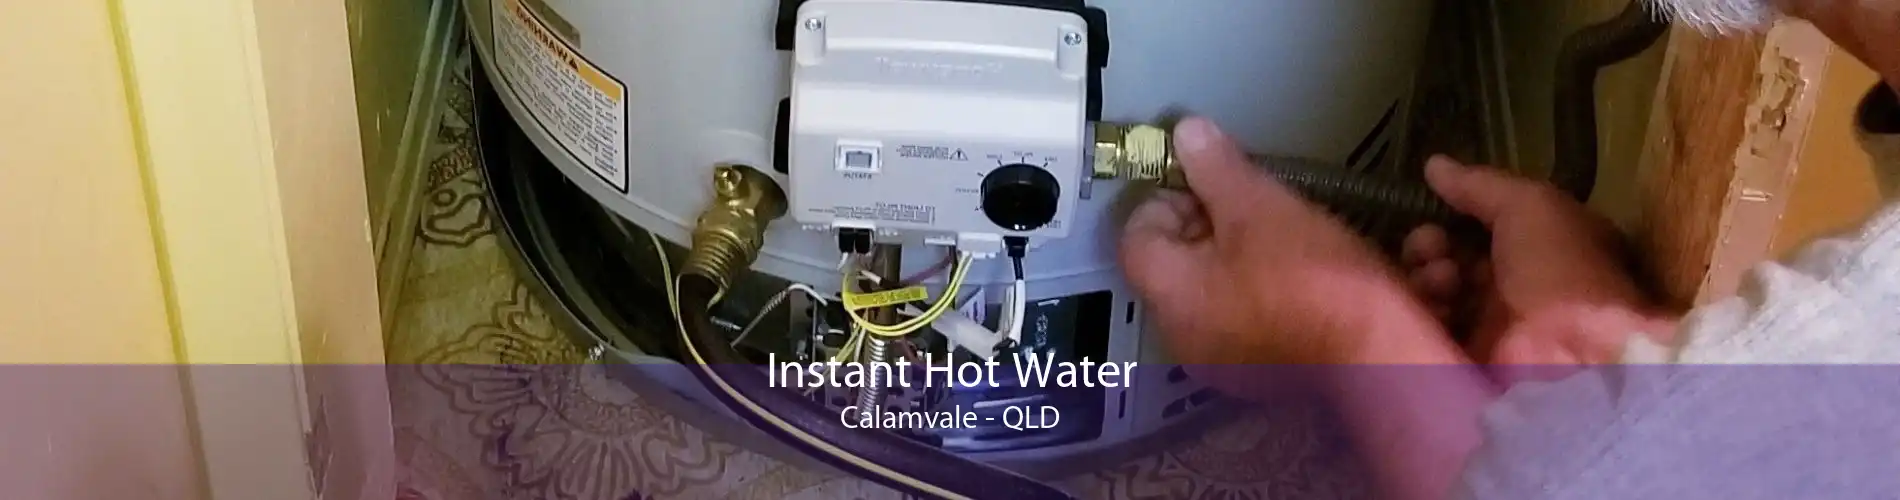 Instant Hot Water Calamvale - QLD